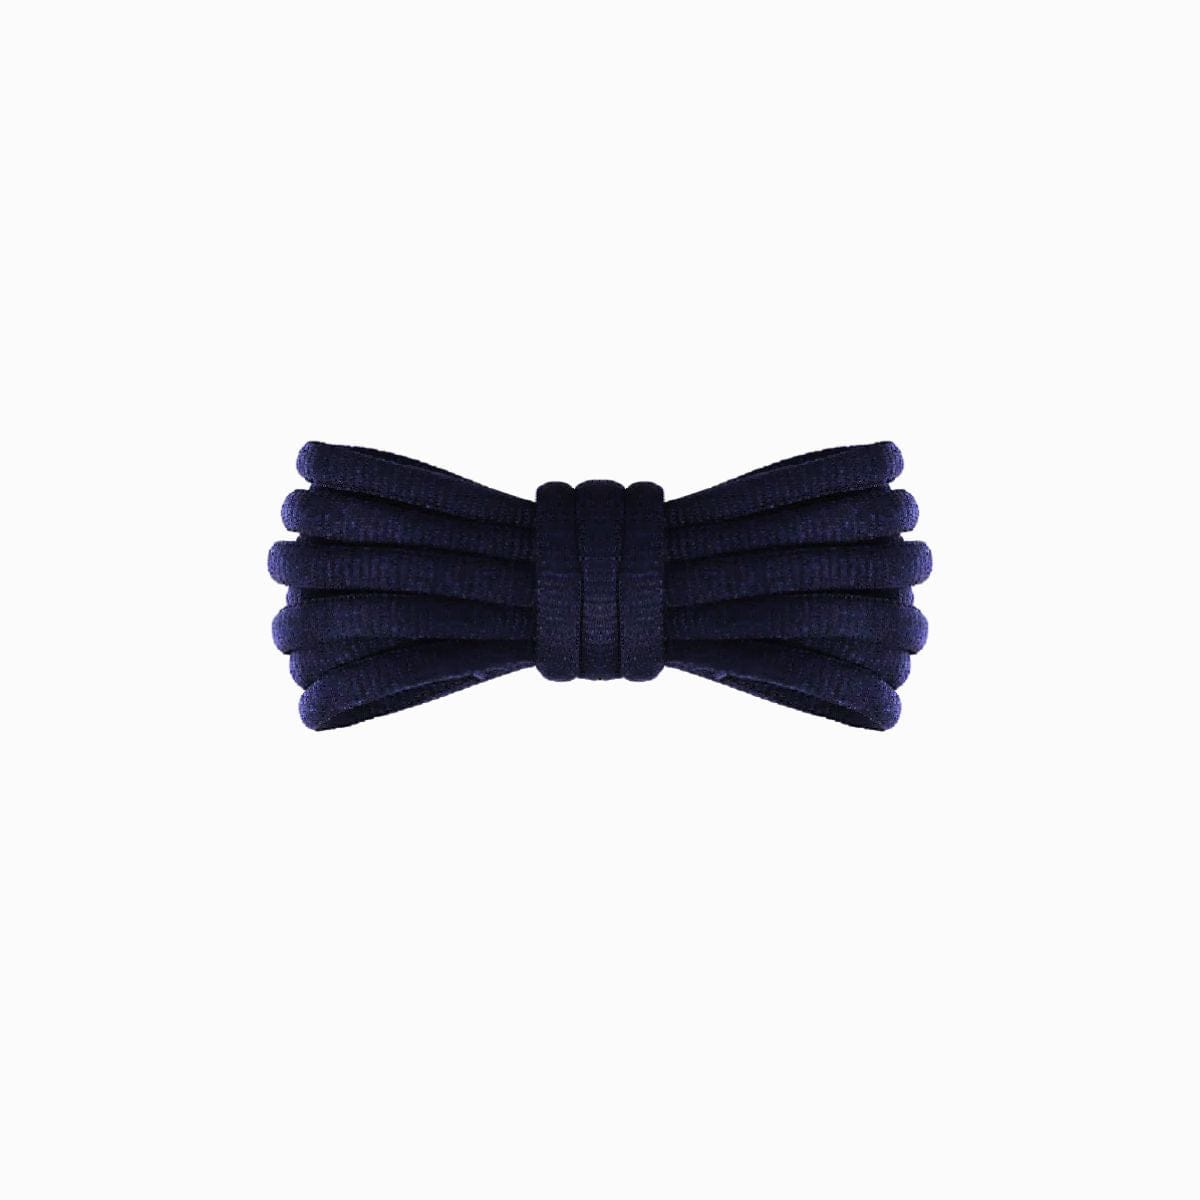 Nike_TN_Replacement_Shoelaces_Navy_Blue